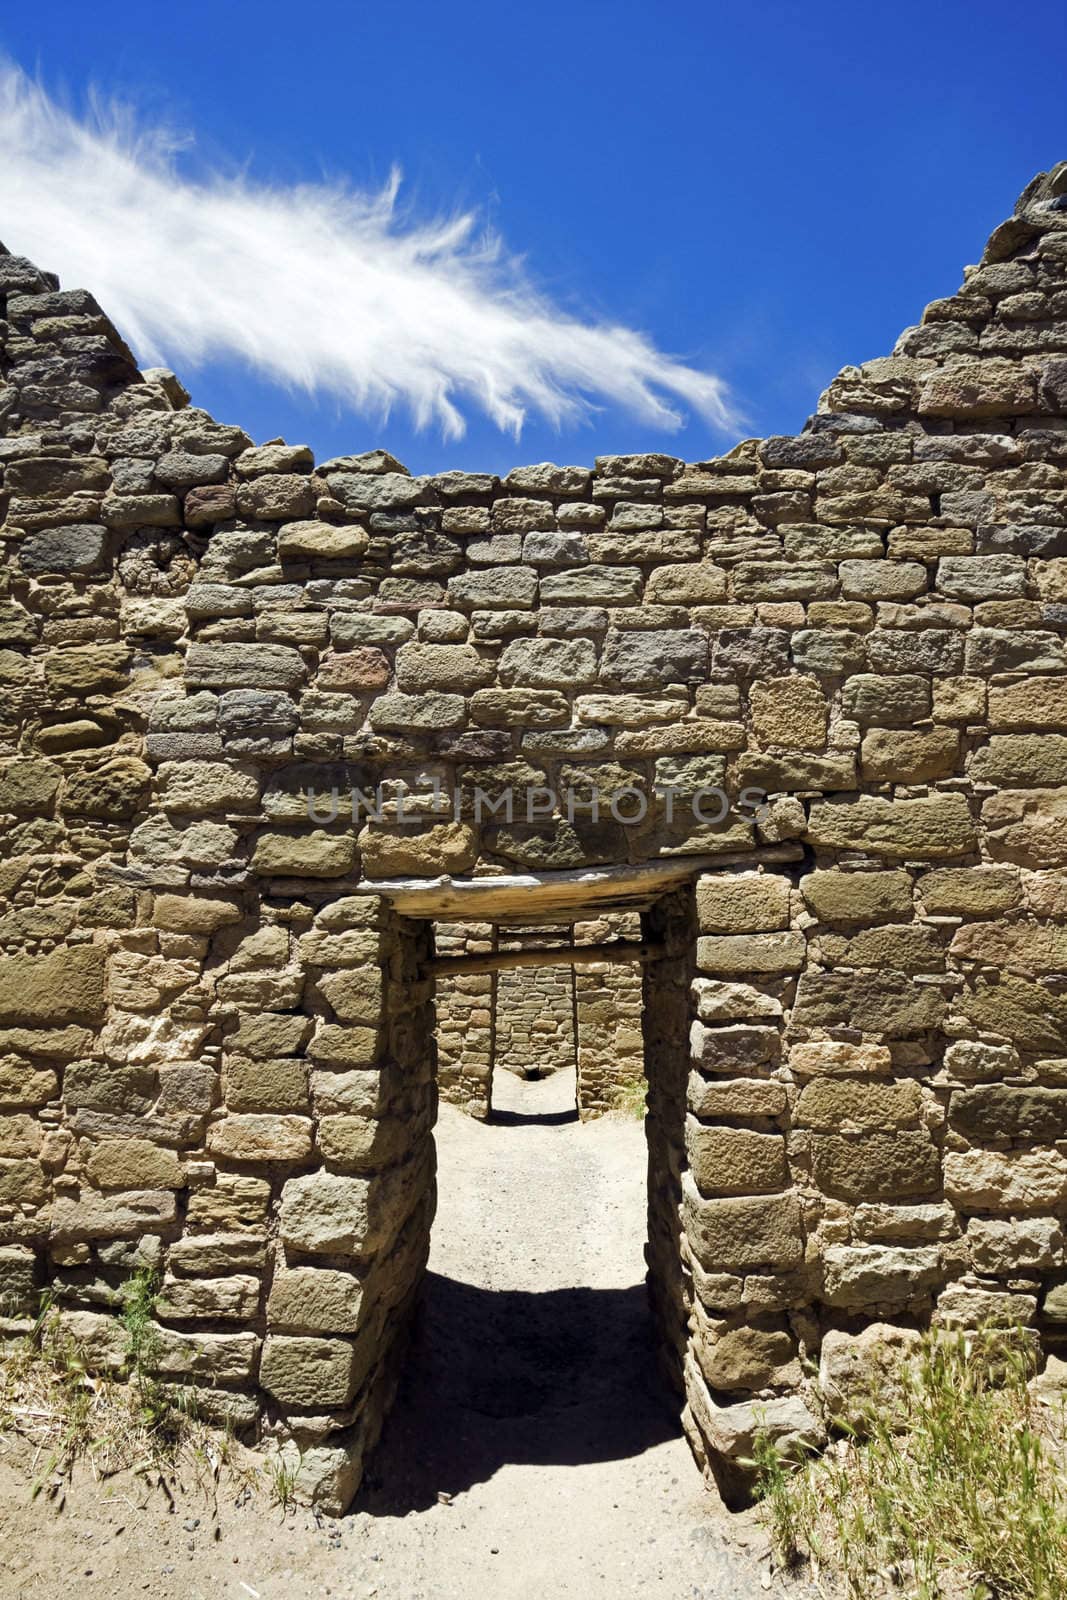 Aztec Ruins National Monument in New Mexico